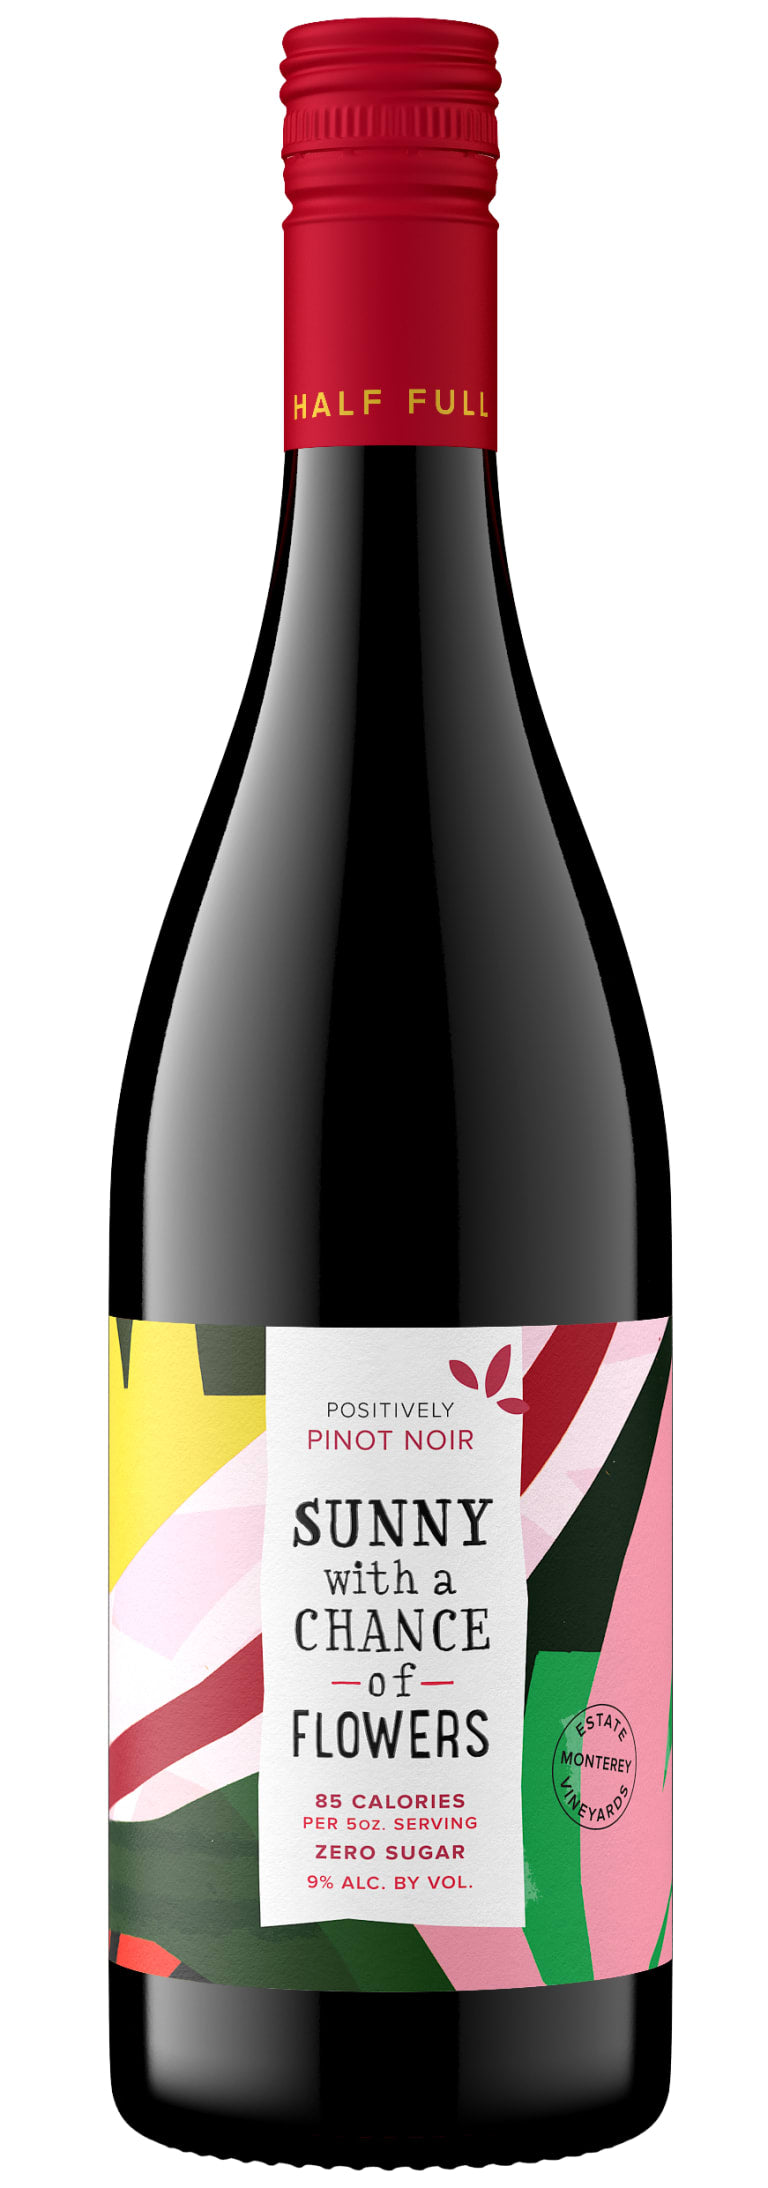 Sunny With A Chance Of Flowers Pinot Noir 2019